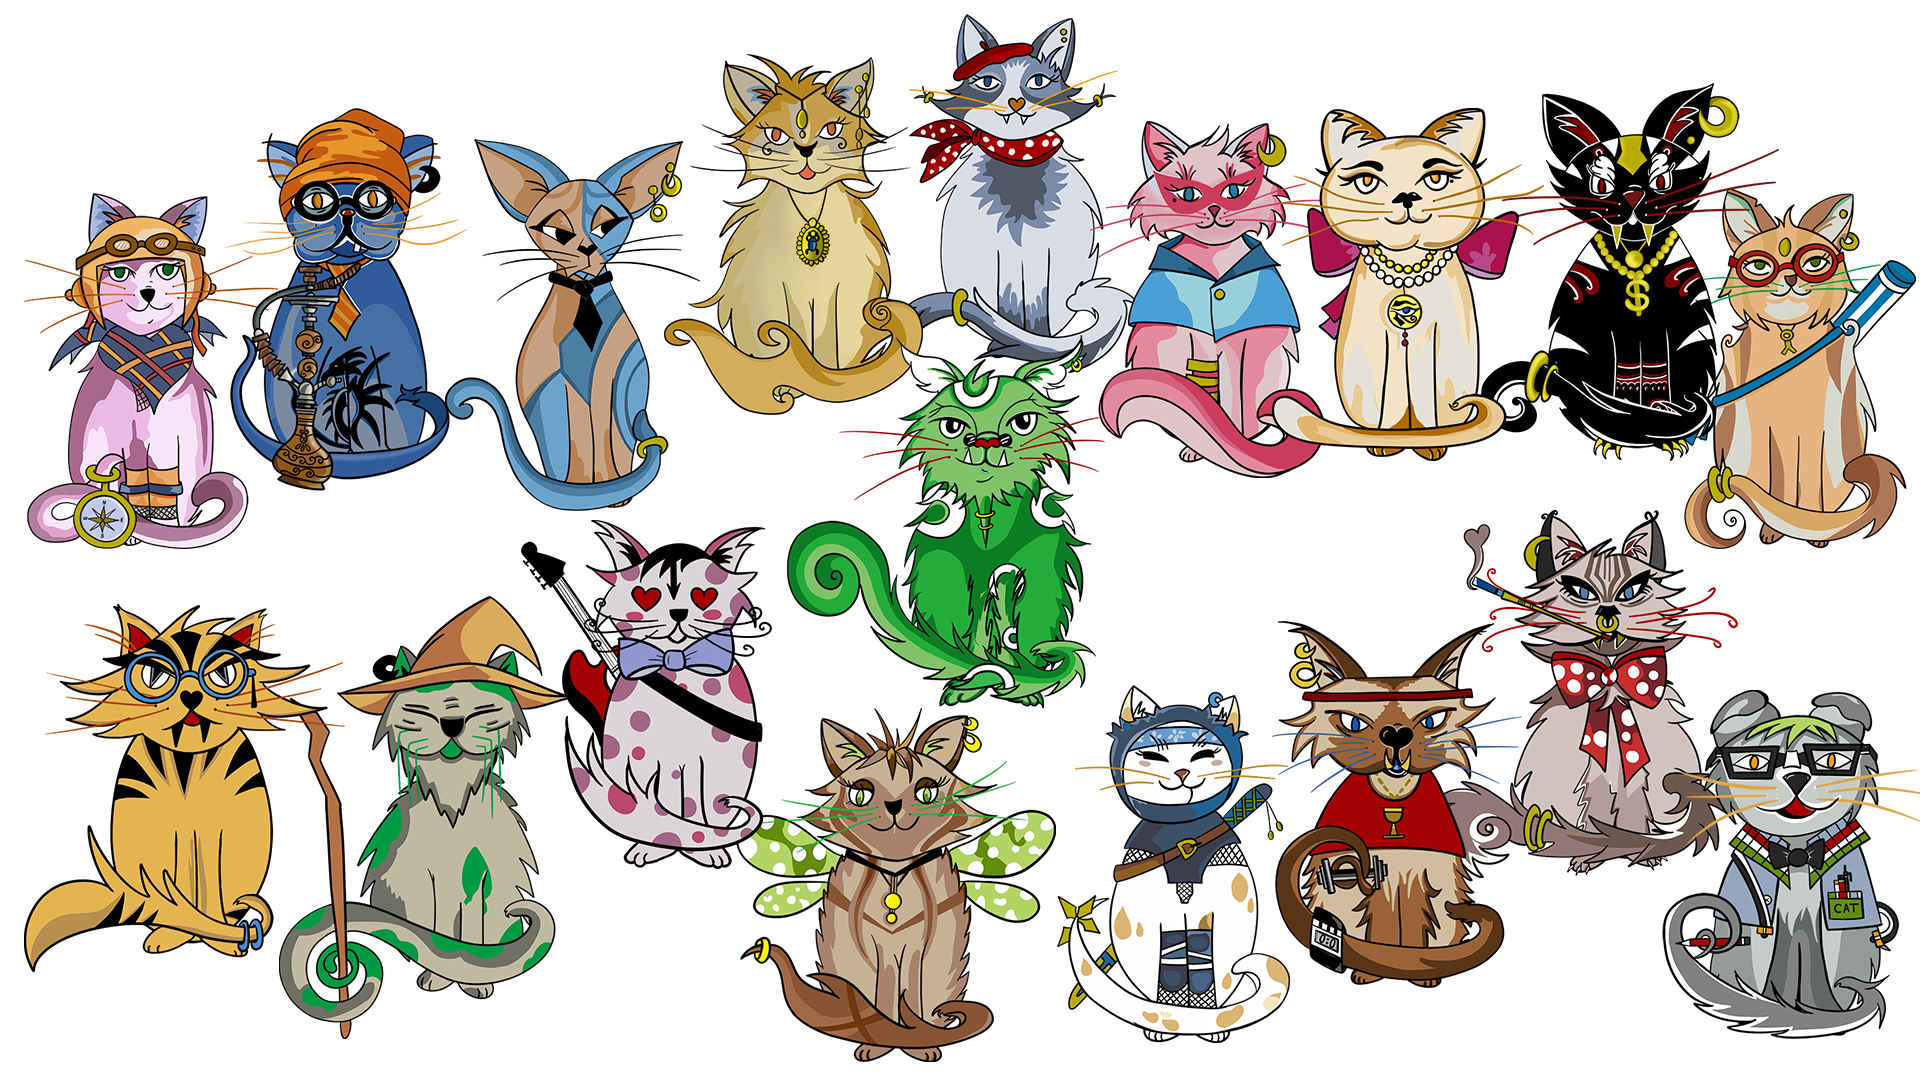 The Good Luck Cats